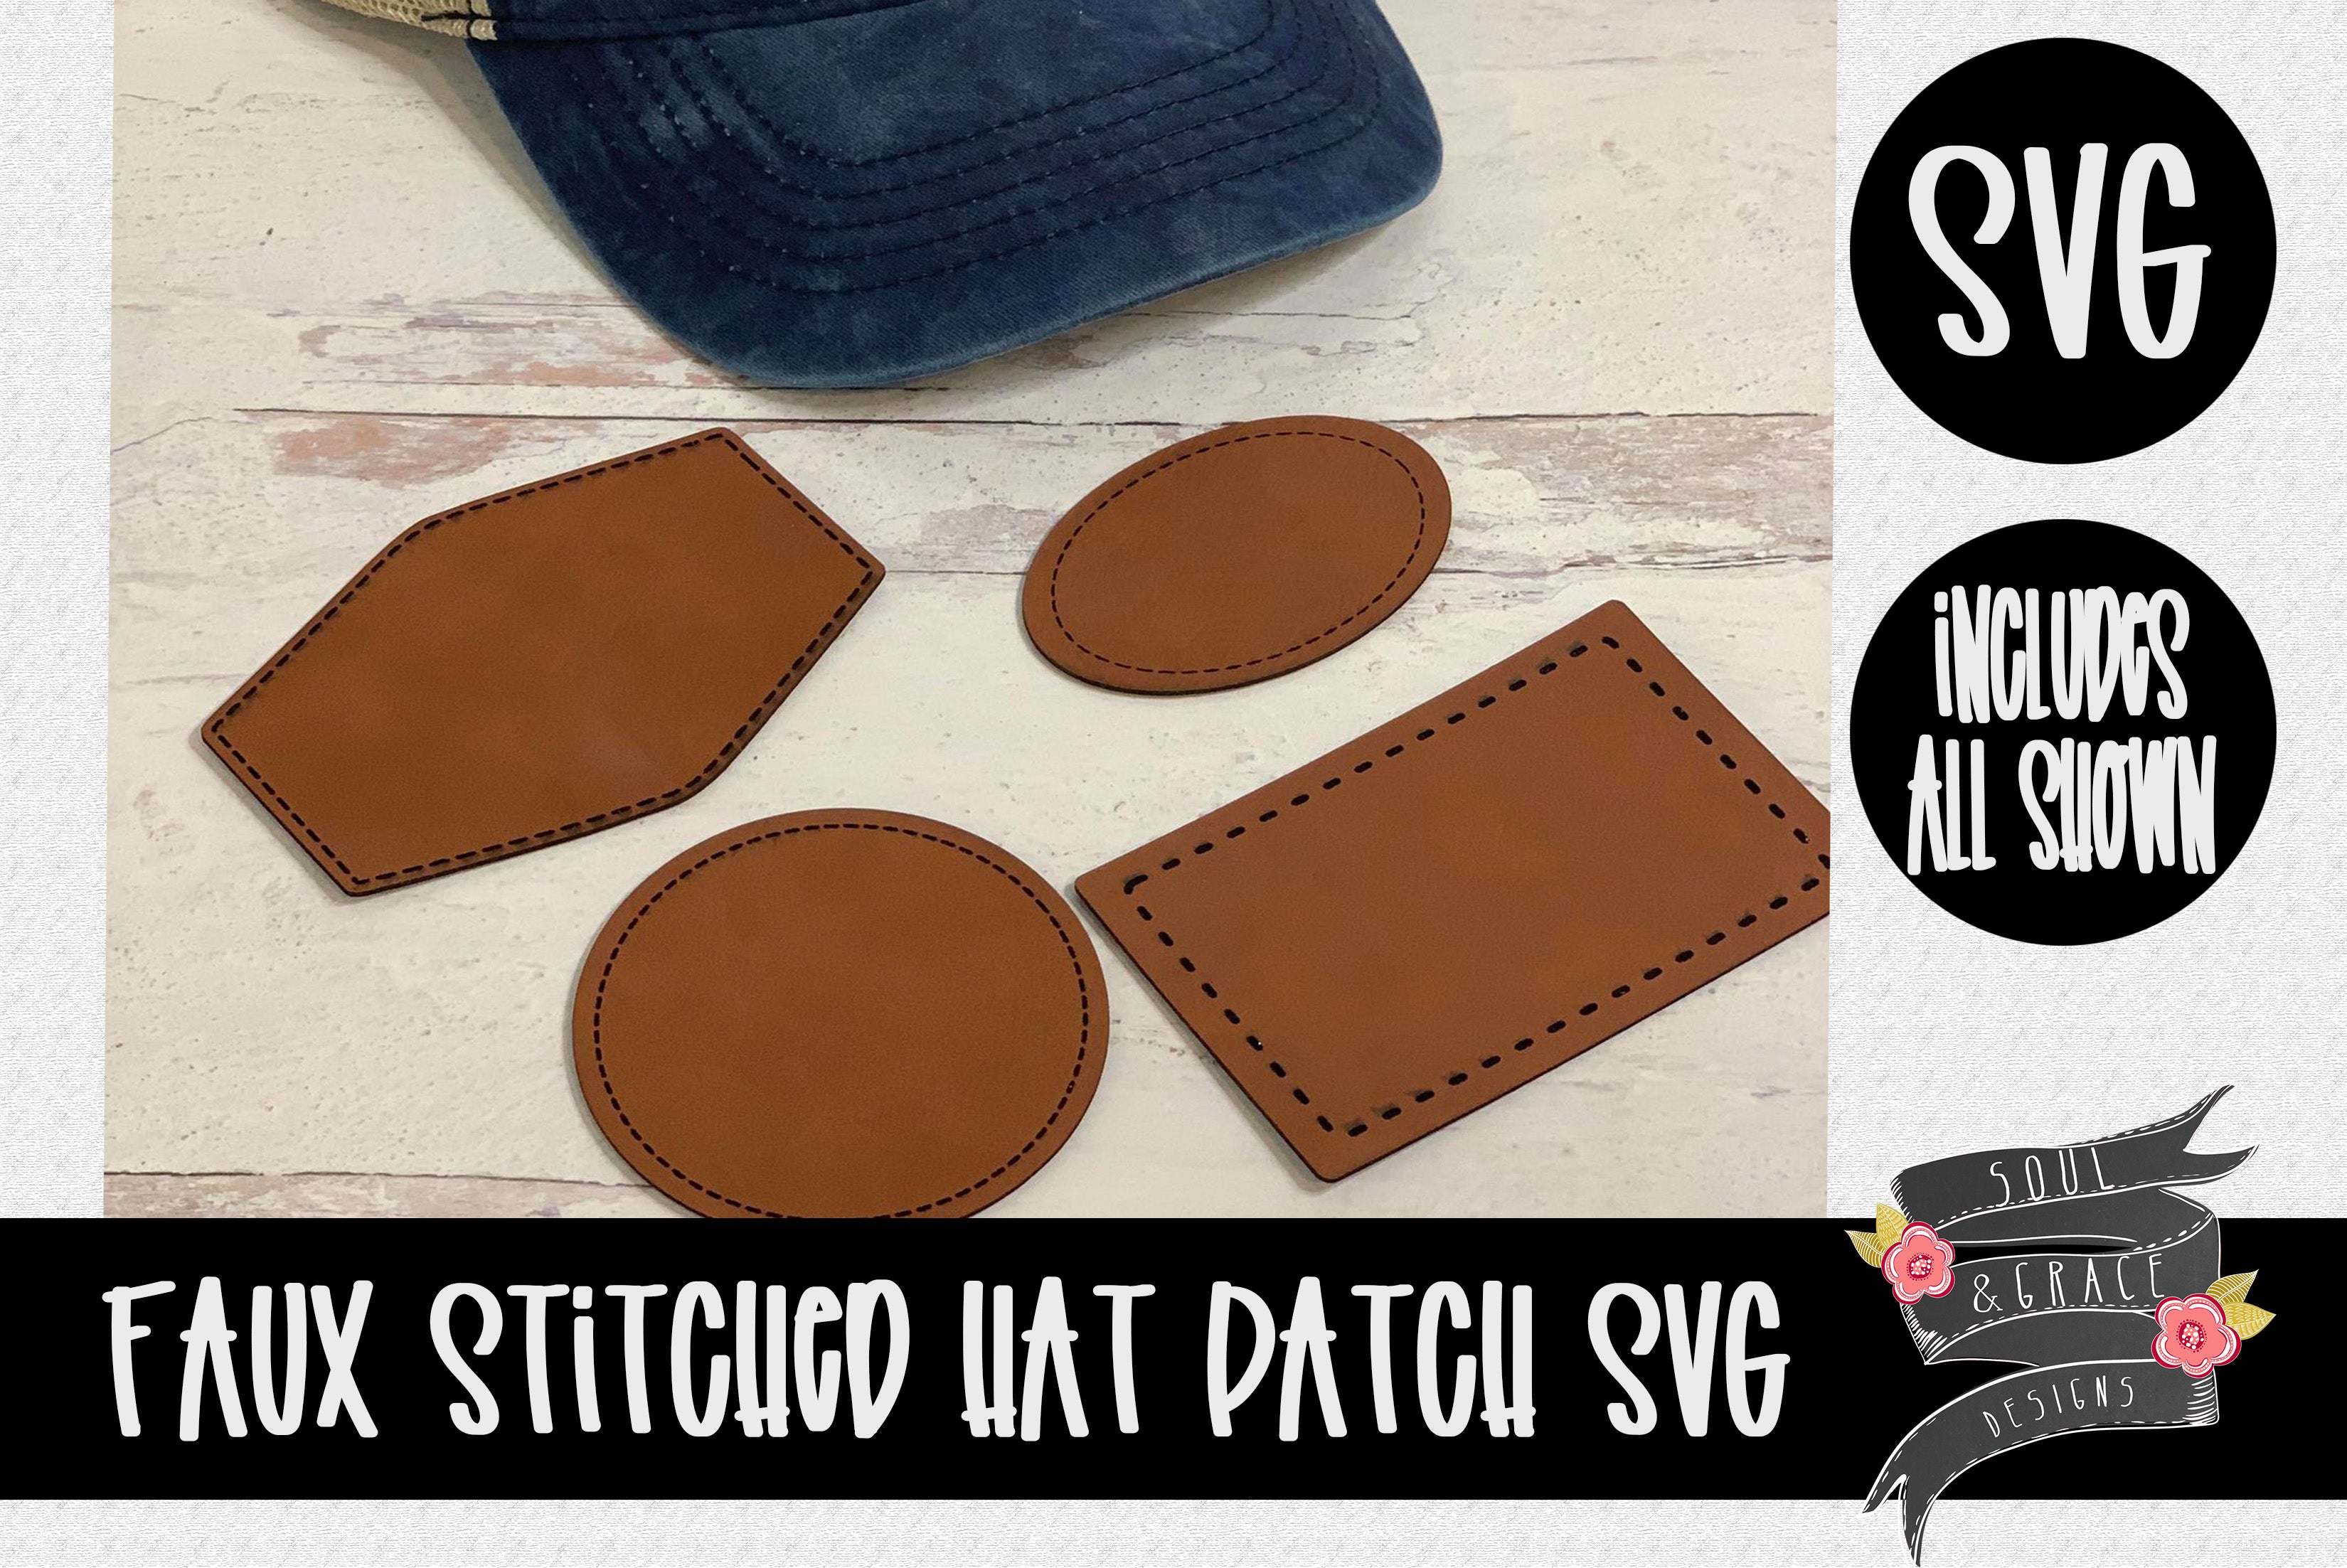 leather cutting shapes template Svg, leather Hat patch files